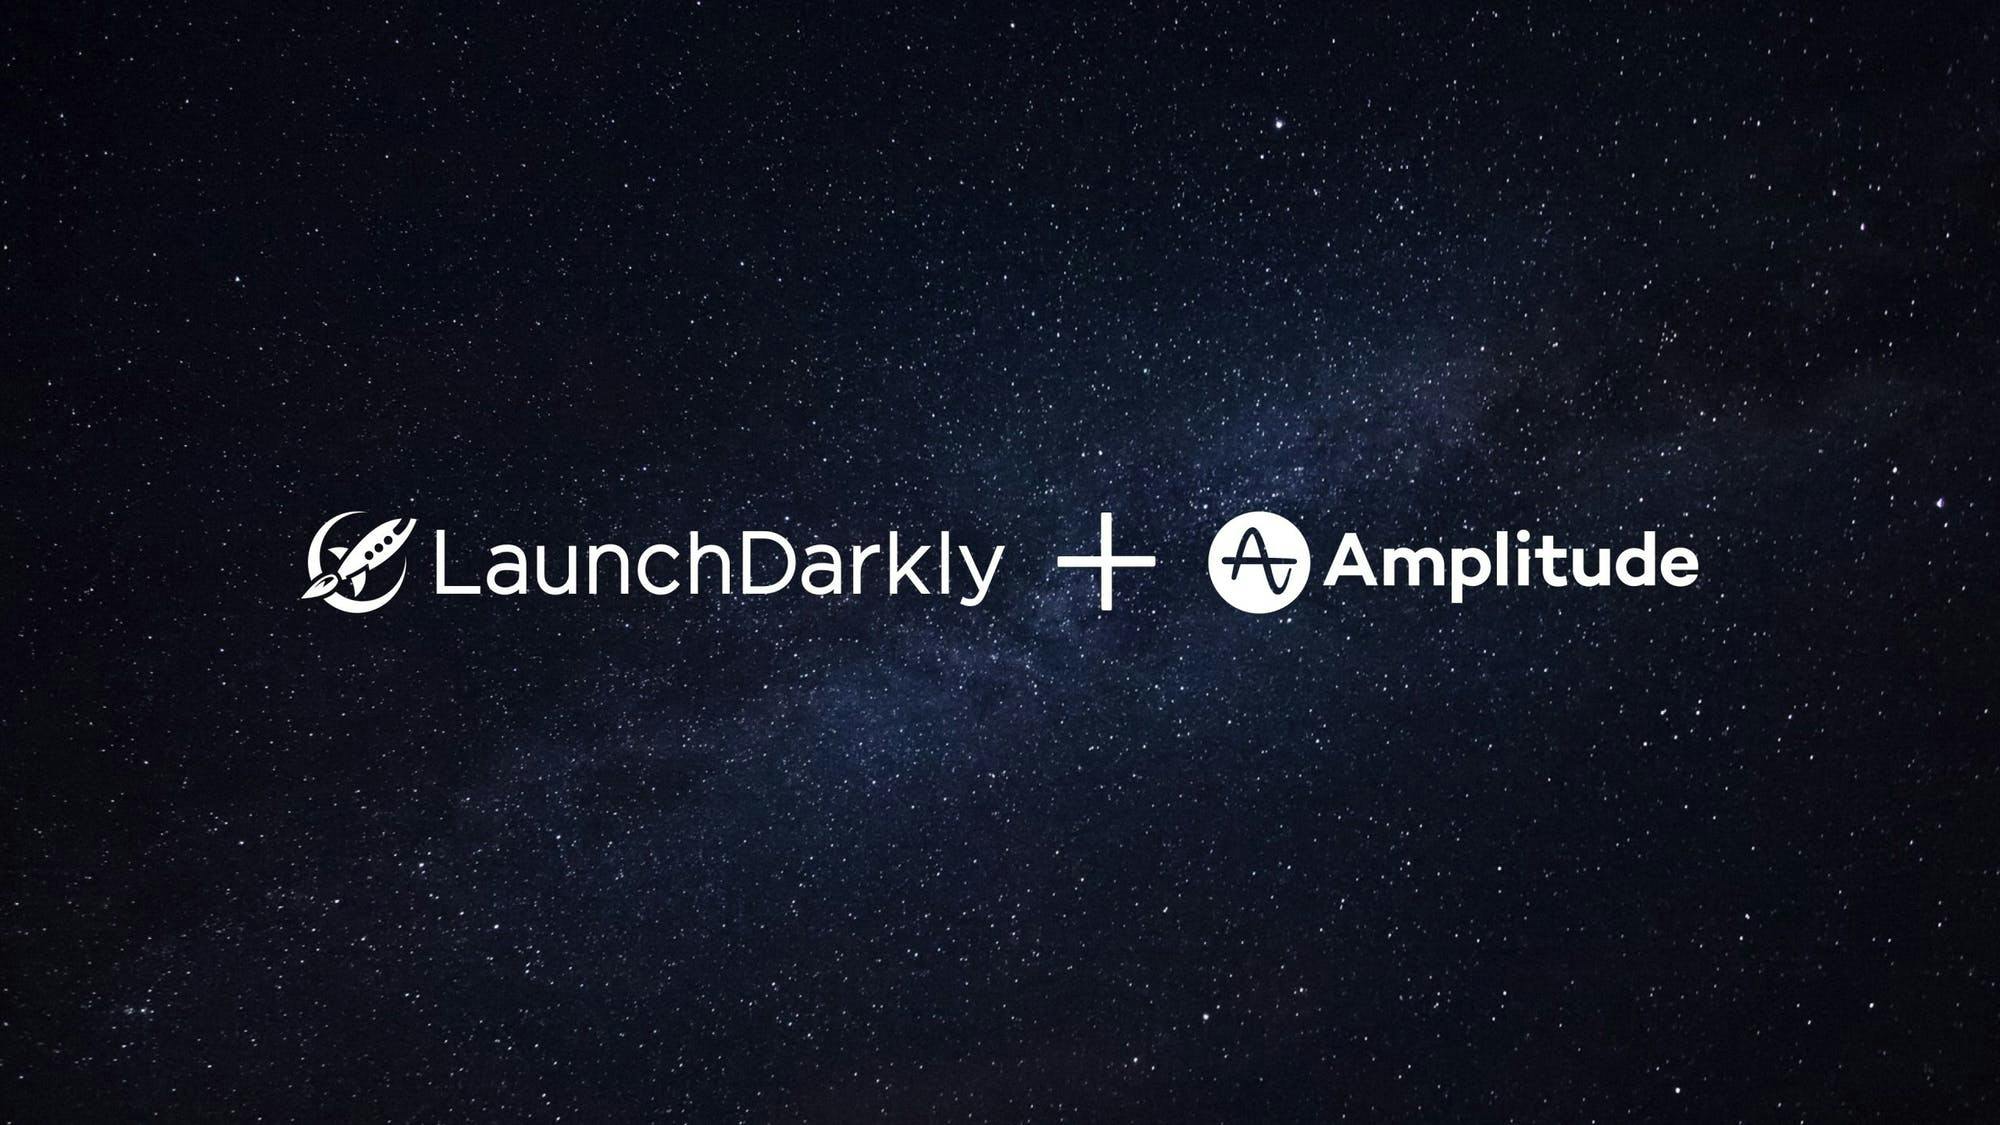 Launched: Syncing Audiences from Amplitude to LaunchDarkly featured image